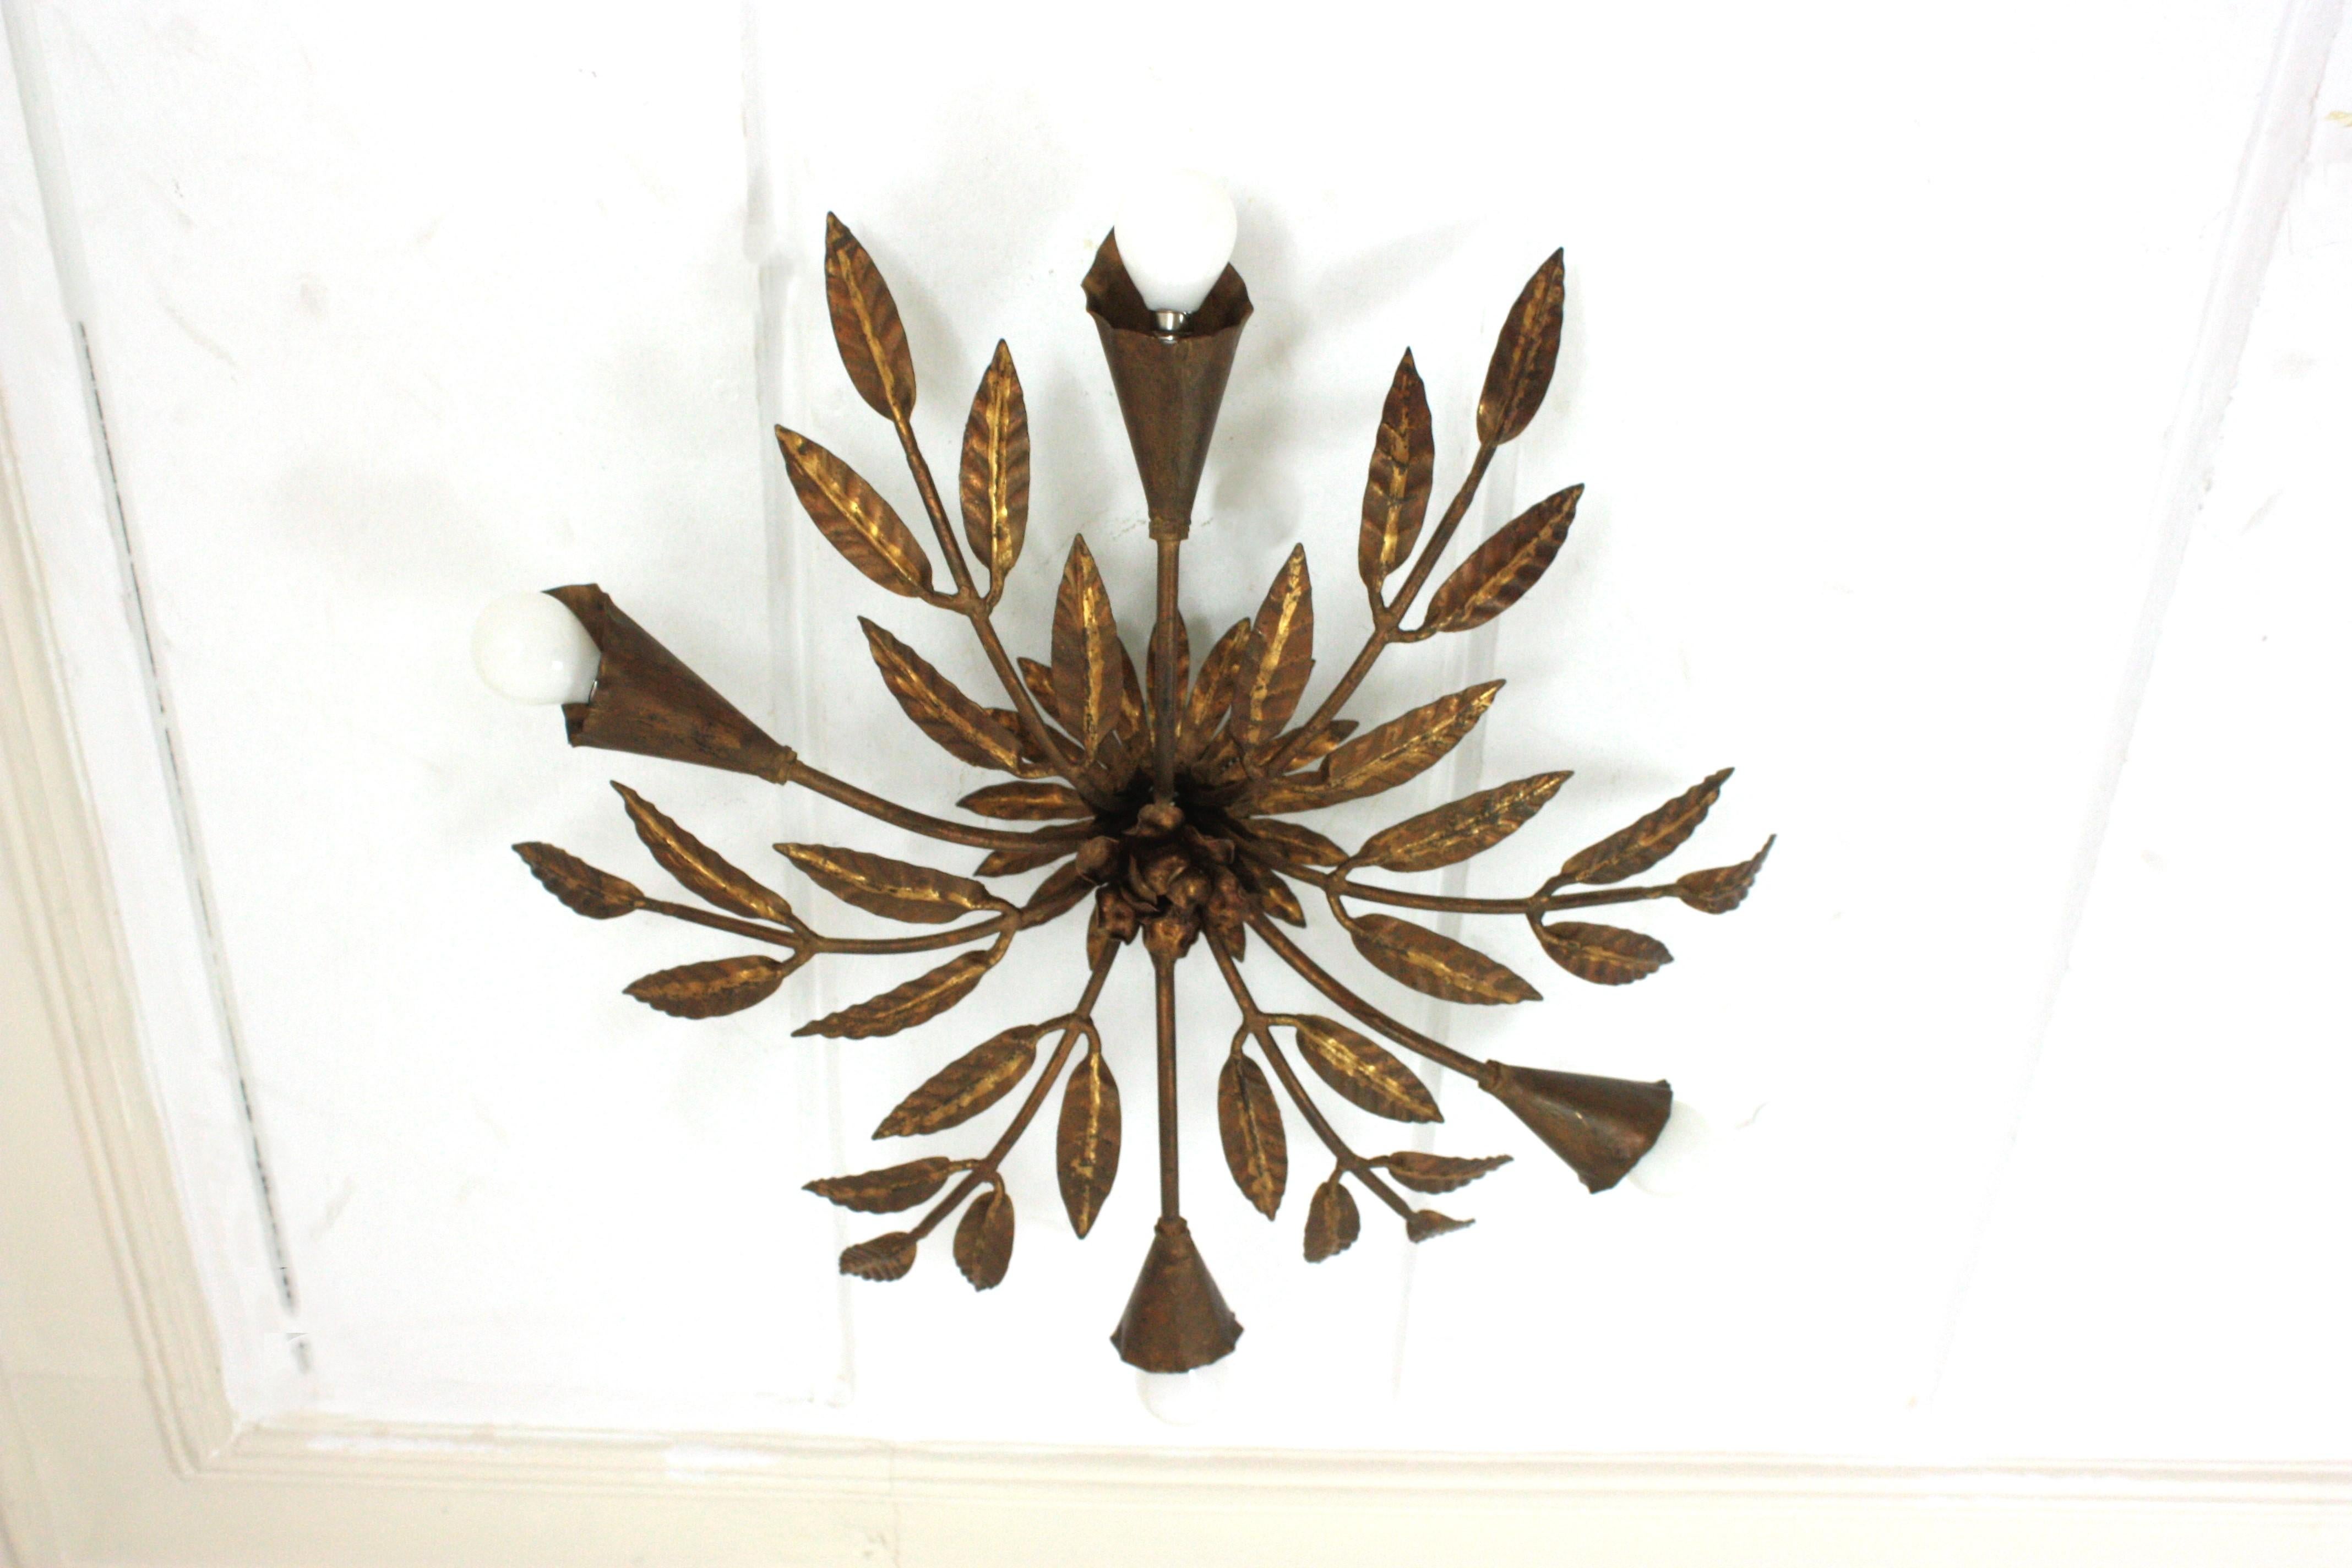 Outstanding spanish foliage sunburst flush mount ceiling light in gilt iron, Ferro Art, 1950s
To be used as ceiling light fixture or as chandelier / pendant light adding a chain to the desired height.
This four-light ceiling lamp features an